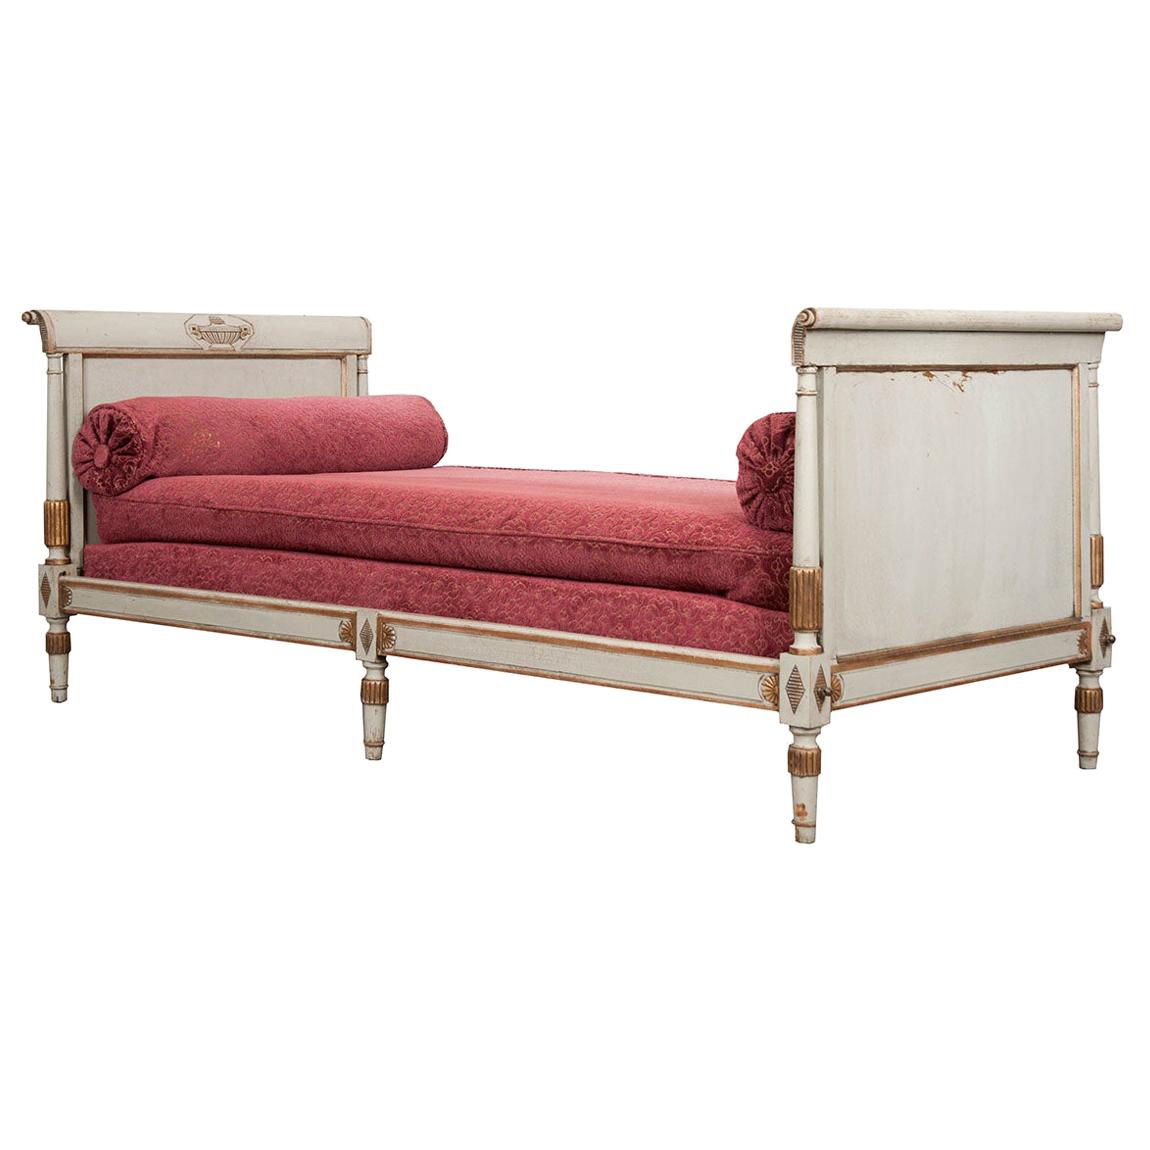 French 19th Century Neoclassical Style Daybed